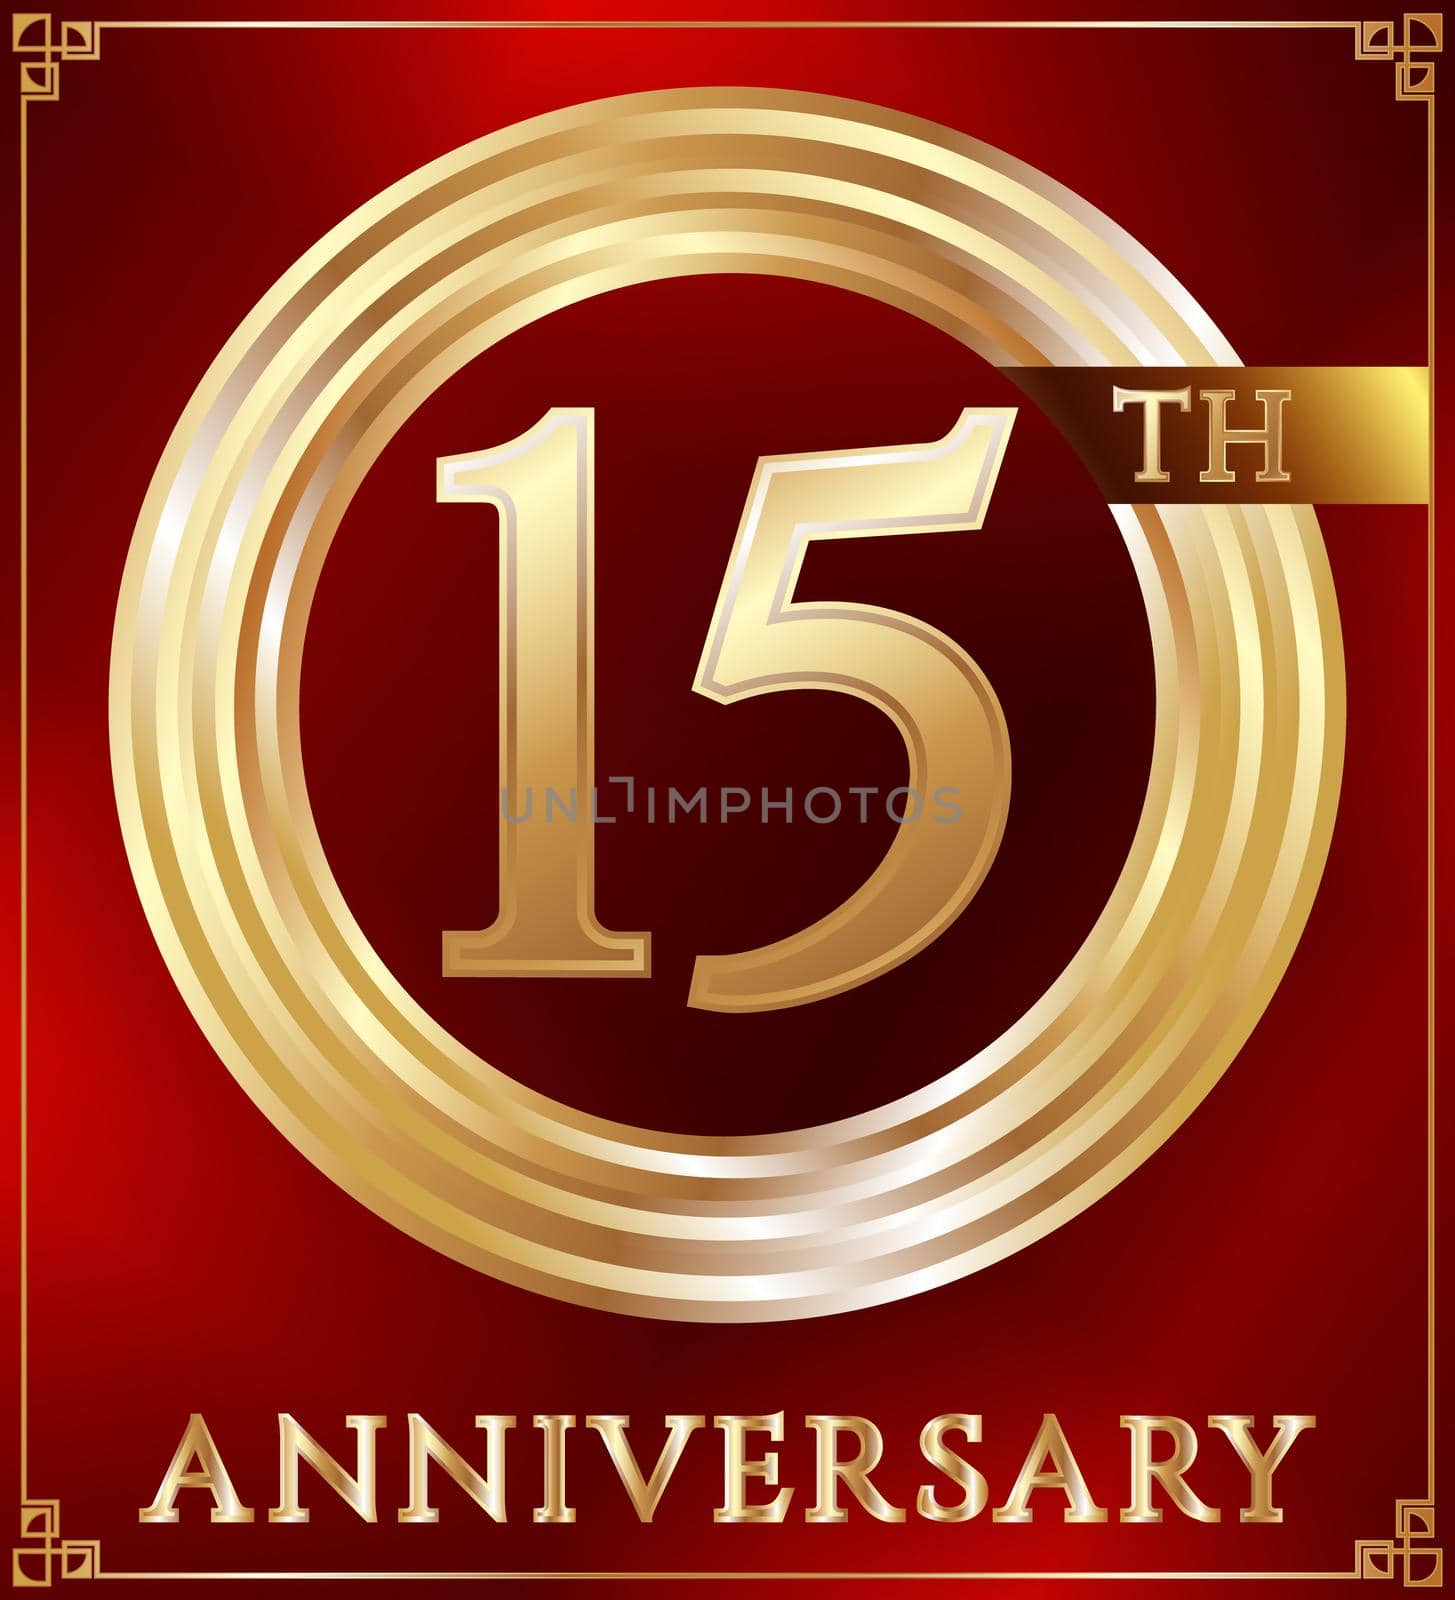 Anniversary gold ring logo number 15. Anniversary card. Red background. Vector illustration.